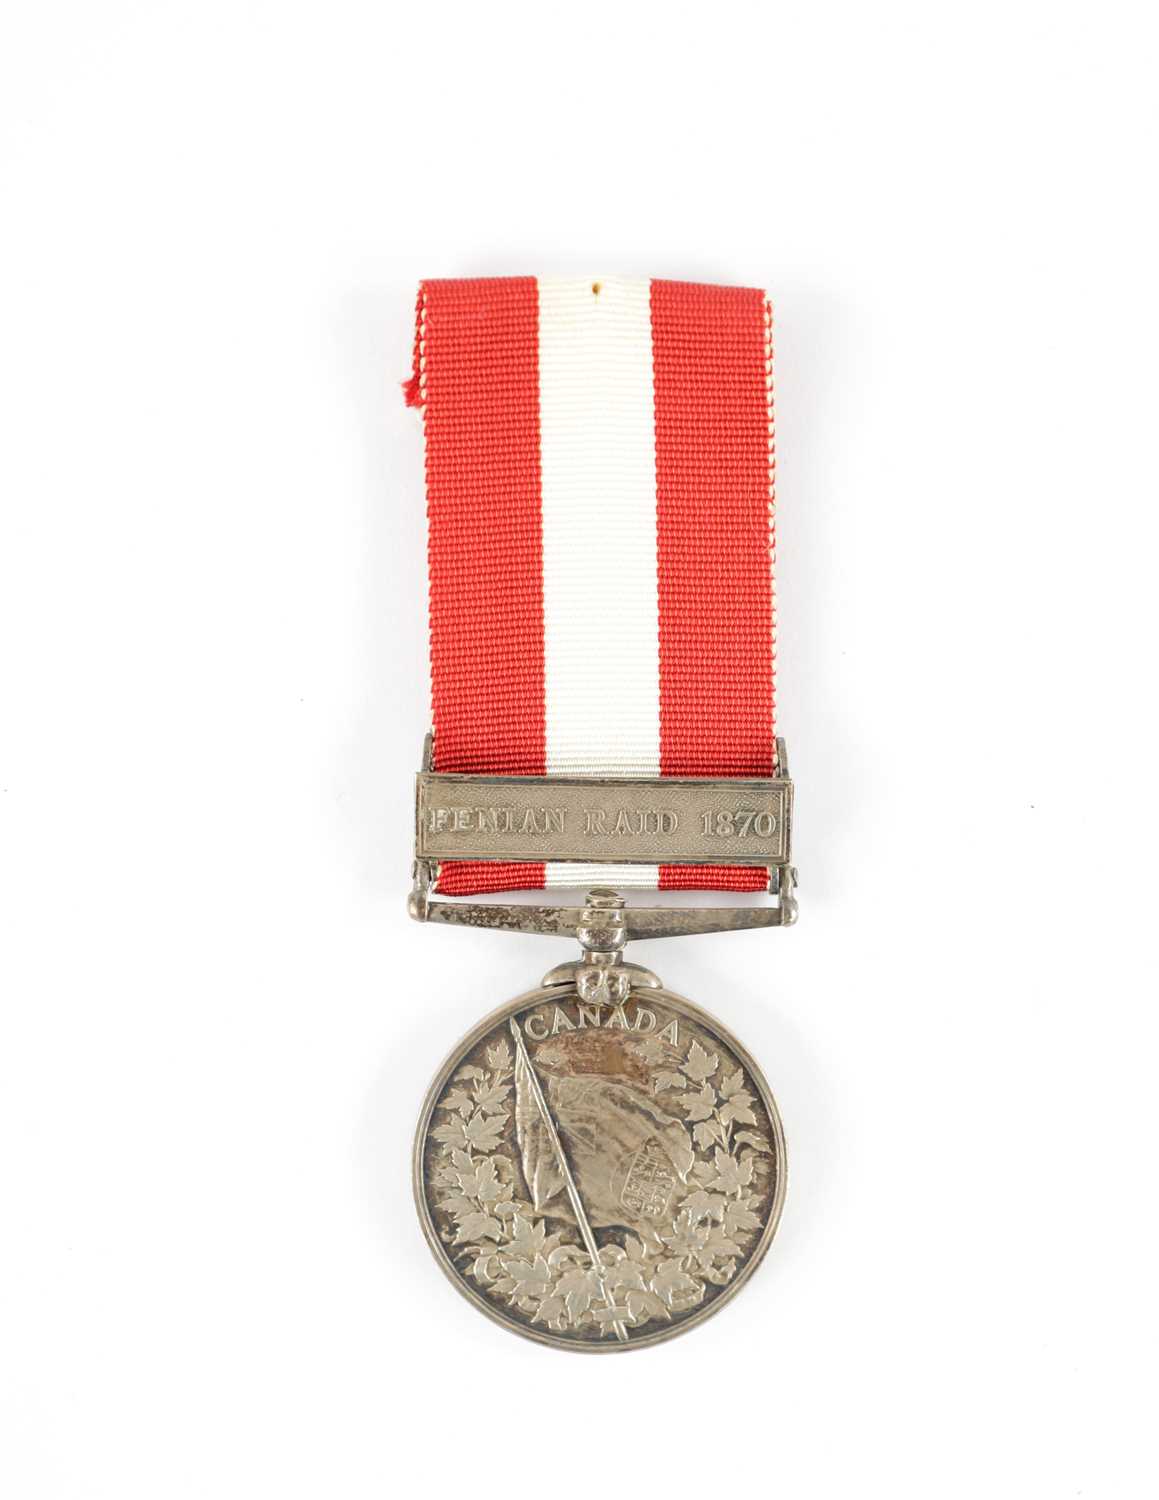 CANADA GENERAL SERVICE MEDAL WITH ONE CLASP